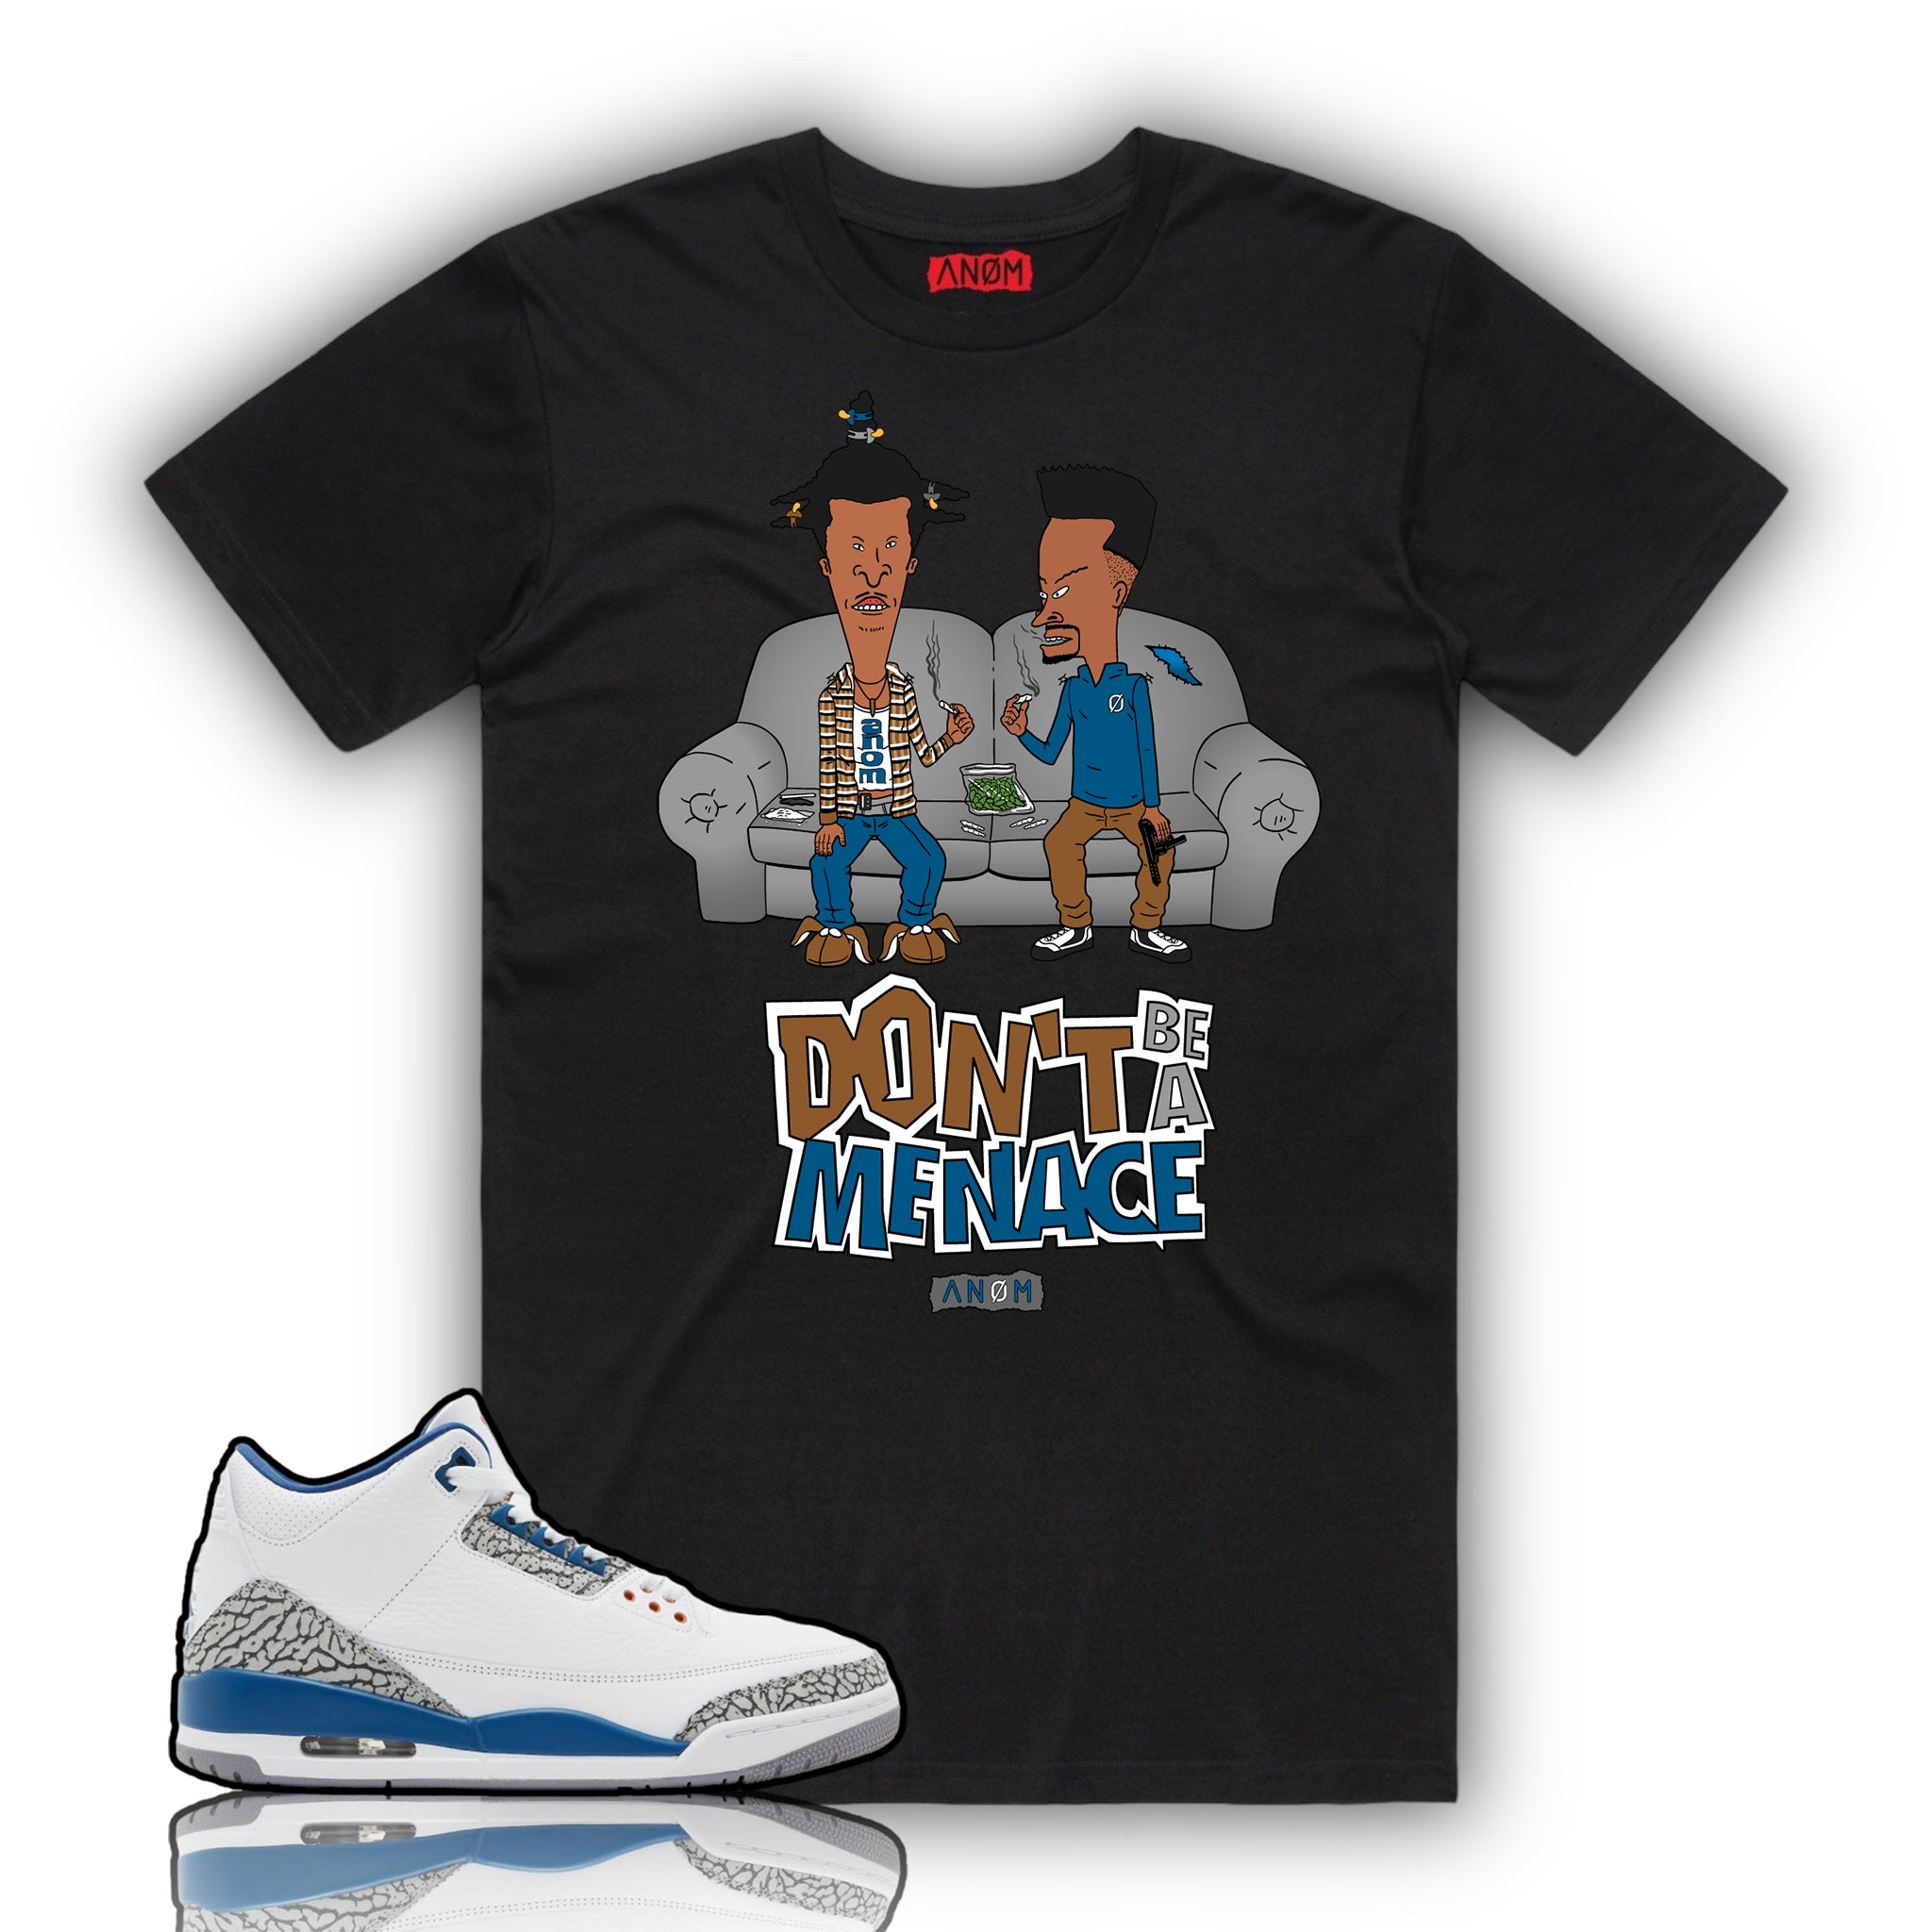 DON’T BE A MENACE TEE-J3 WIZARDS TIE/BCK